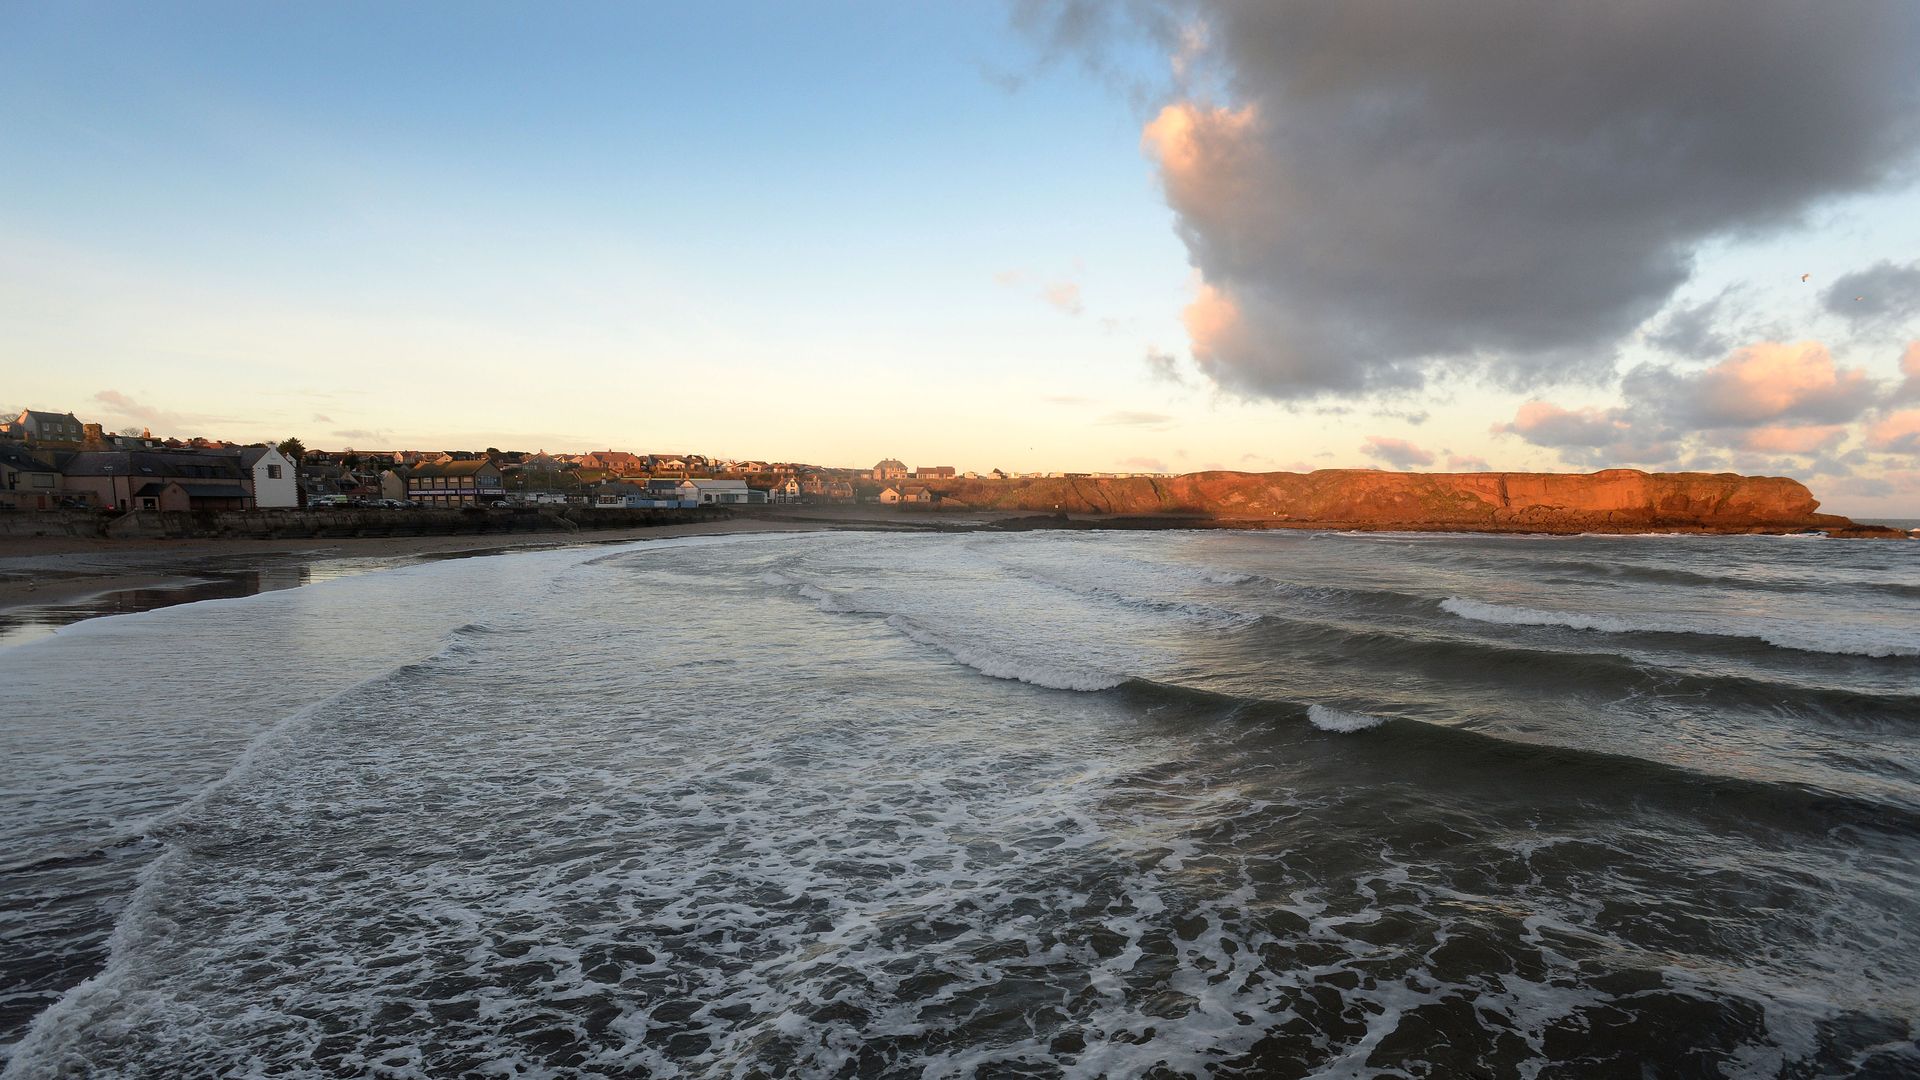 Eyemouth Harbor at sunrise after a tidal storm surge overnight on December 6, 2013 in Eyemouth, Scotland.